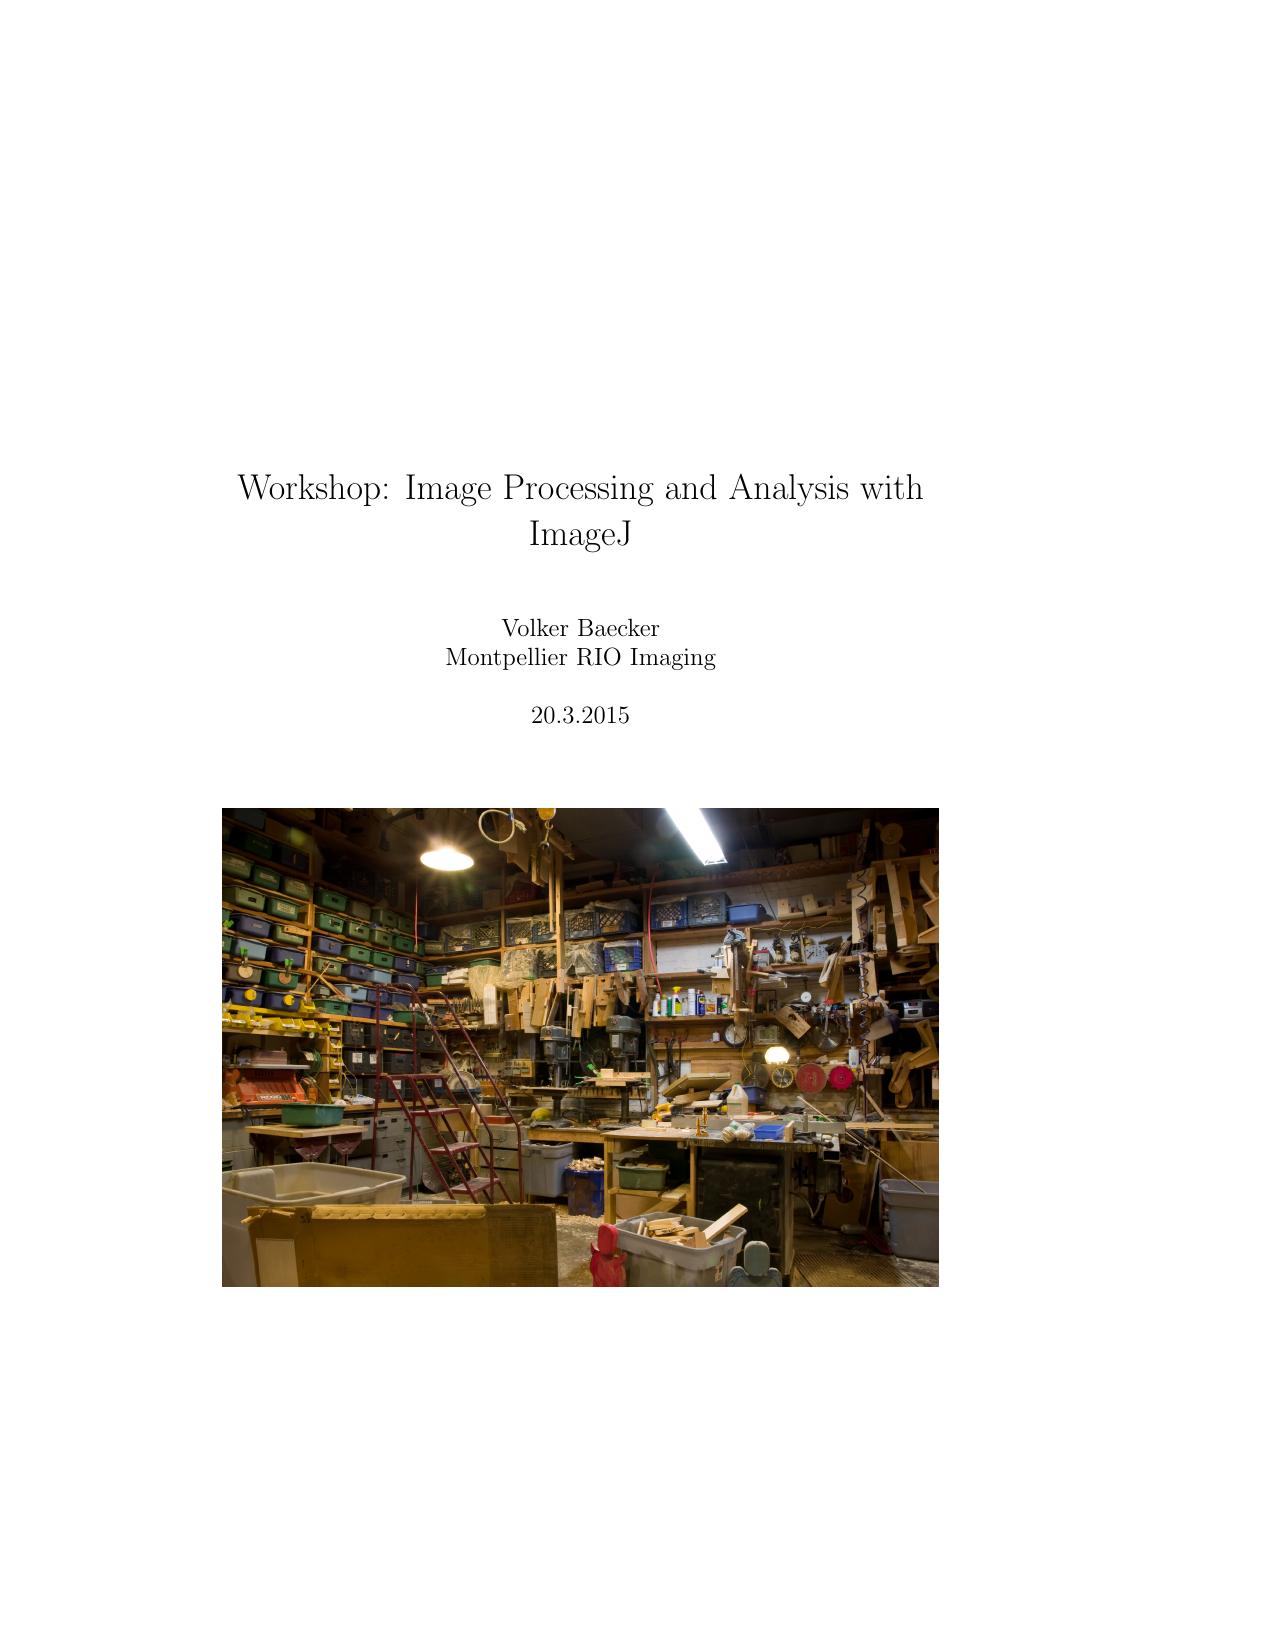 Image Processing and Analysis With Image J 2015.pdf